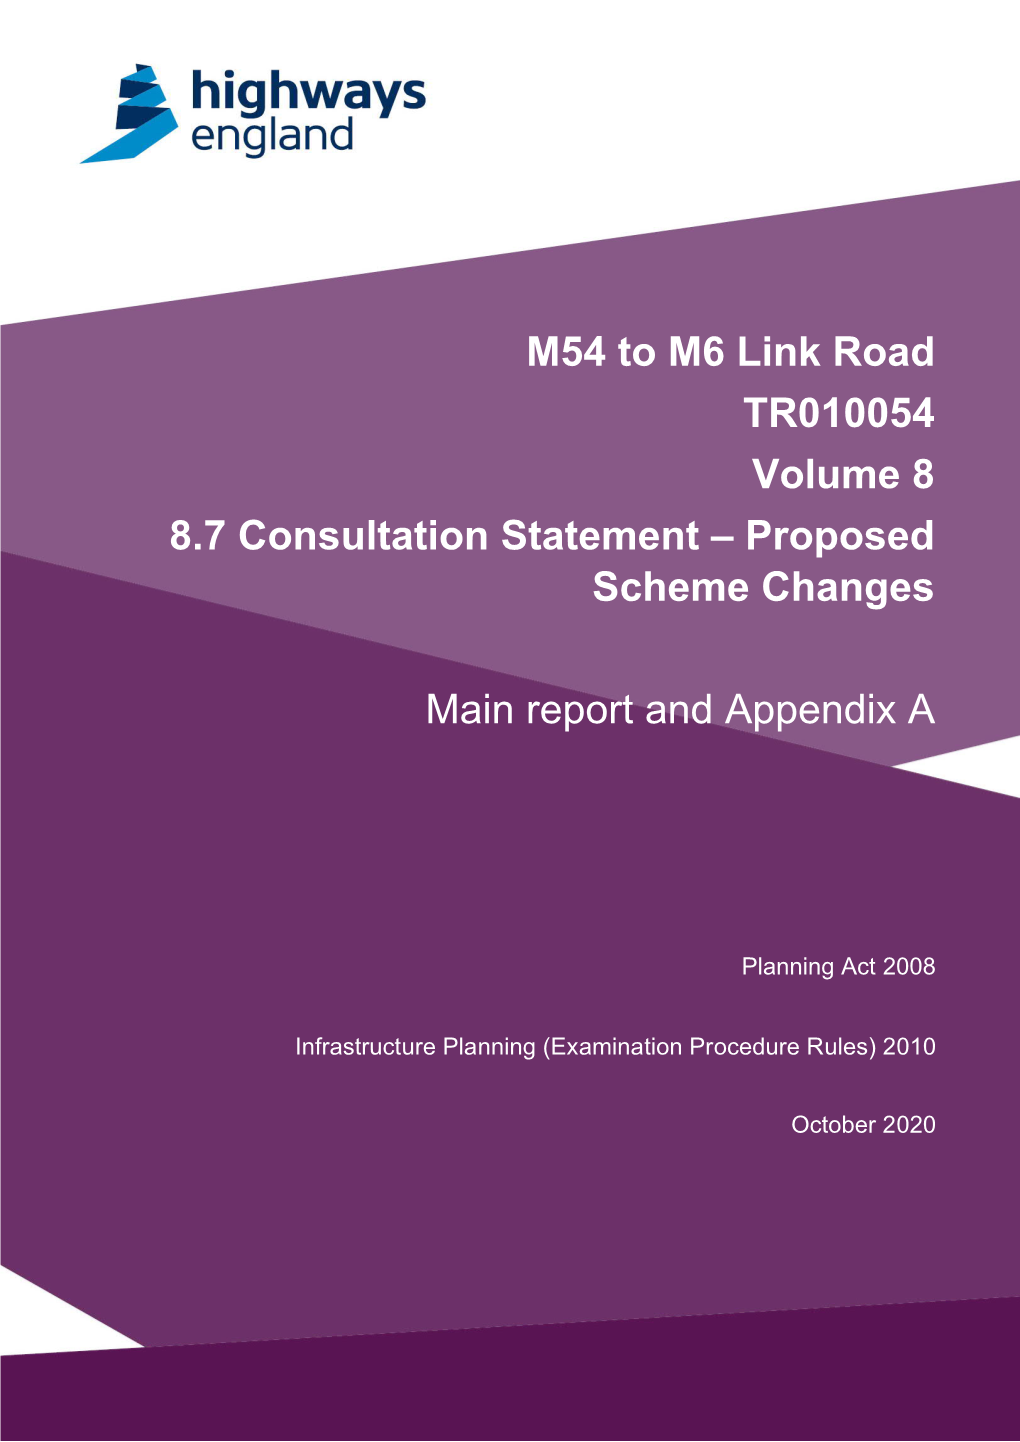 M54 to M6 Link Road TR010054 Volume 8 8.7 Consultation Statement – Proposed Scheme Changes Main Report and Appendix A